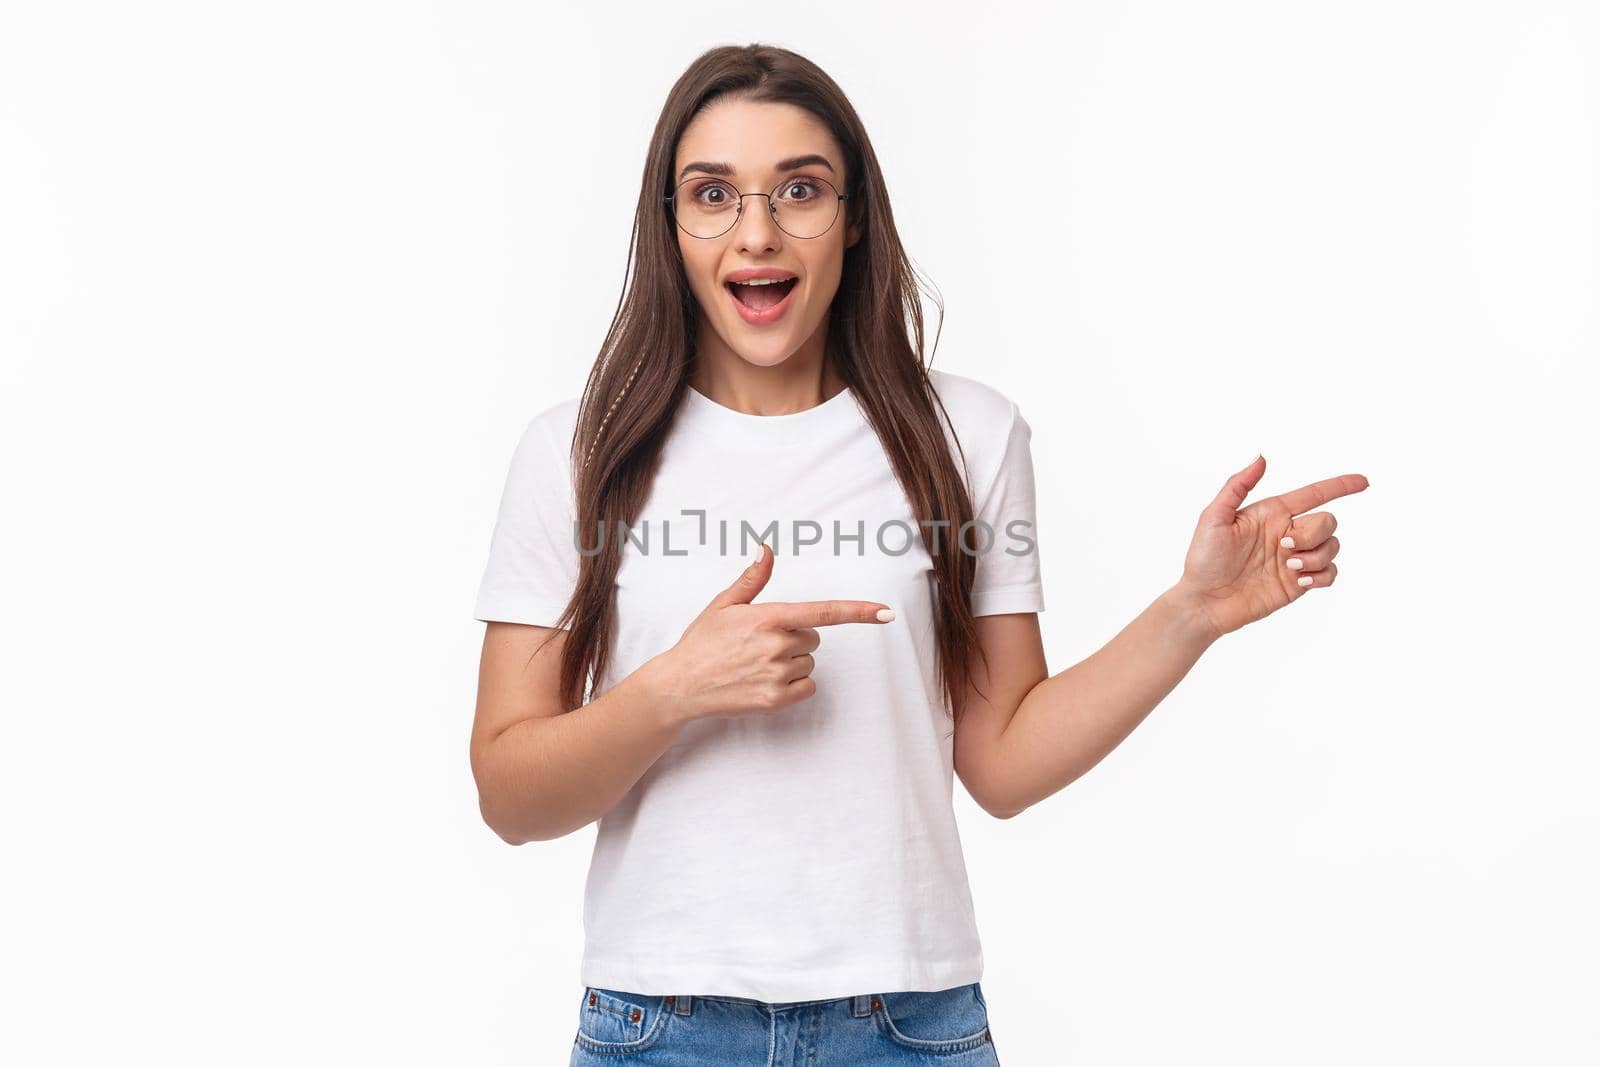 Waist-up portrait of excited, enthusiastic brunette 25s woman in t-shirt, jeans, pointing fingers right and look astonished with amused smile at camera, suggesting visit awesome new place.